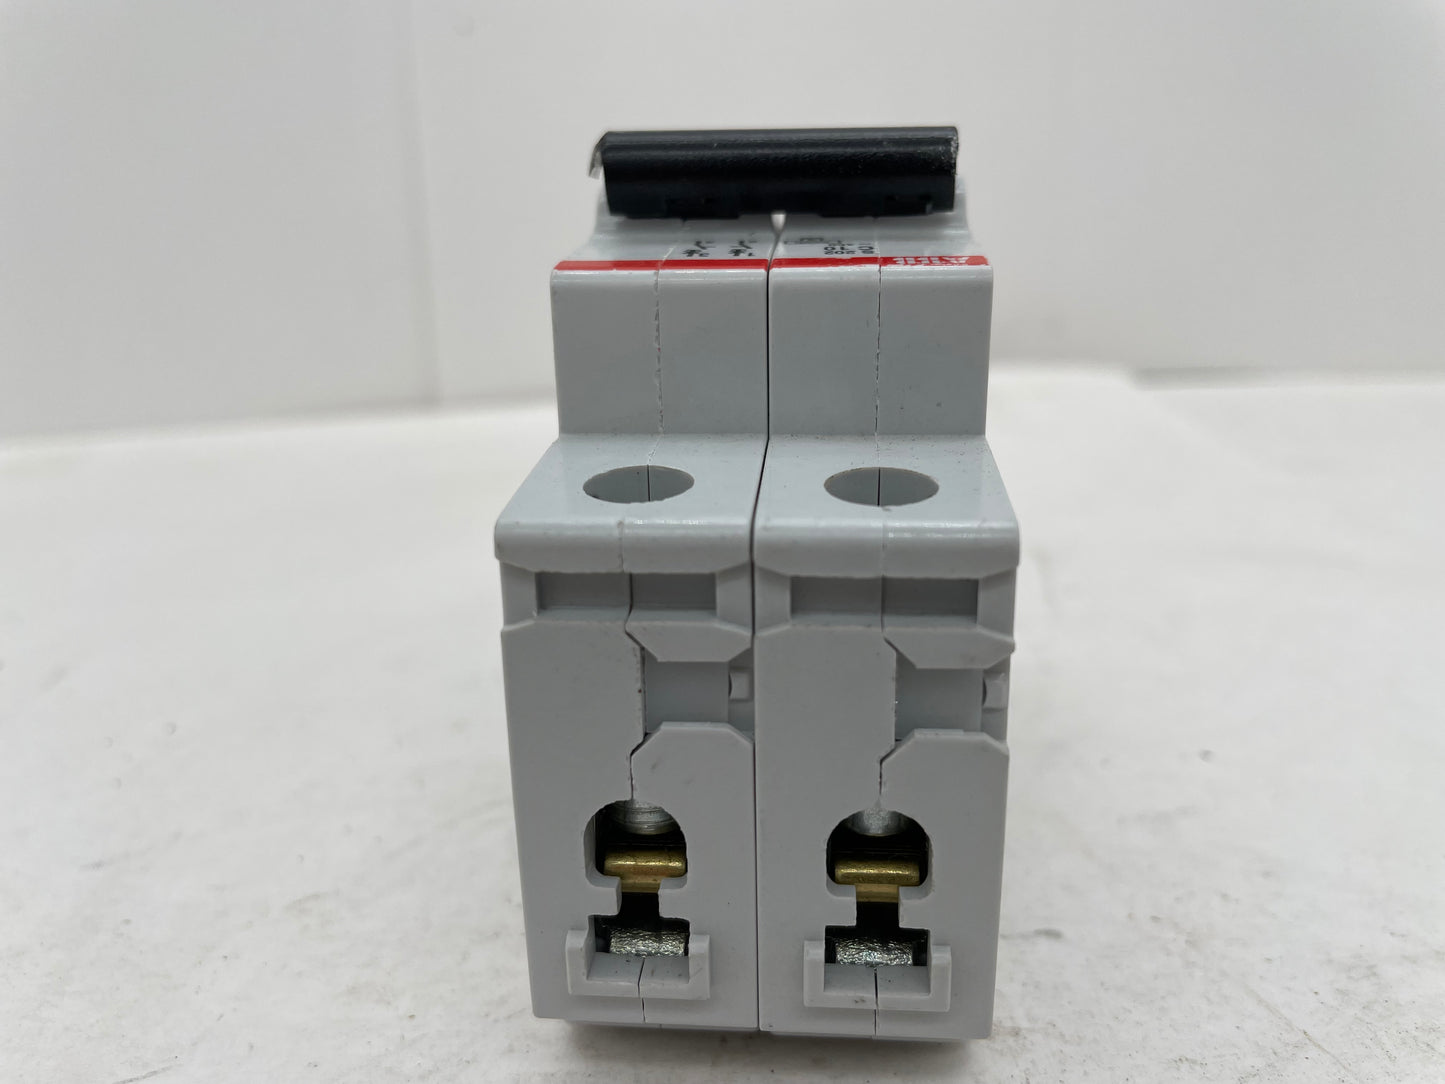 ABB S202-C10 480Y/277VAC 2P 10A DIN Rail Mounted Circuit Breaker - Reconditioned